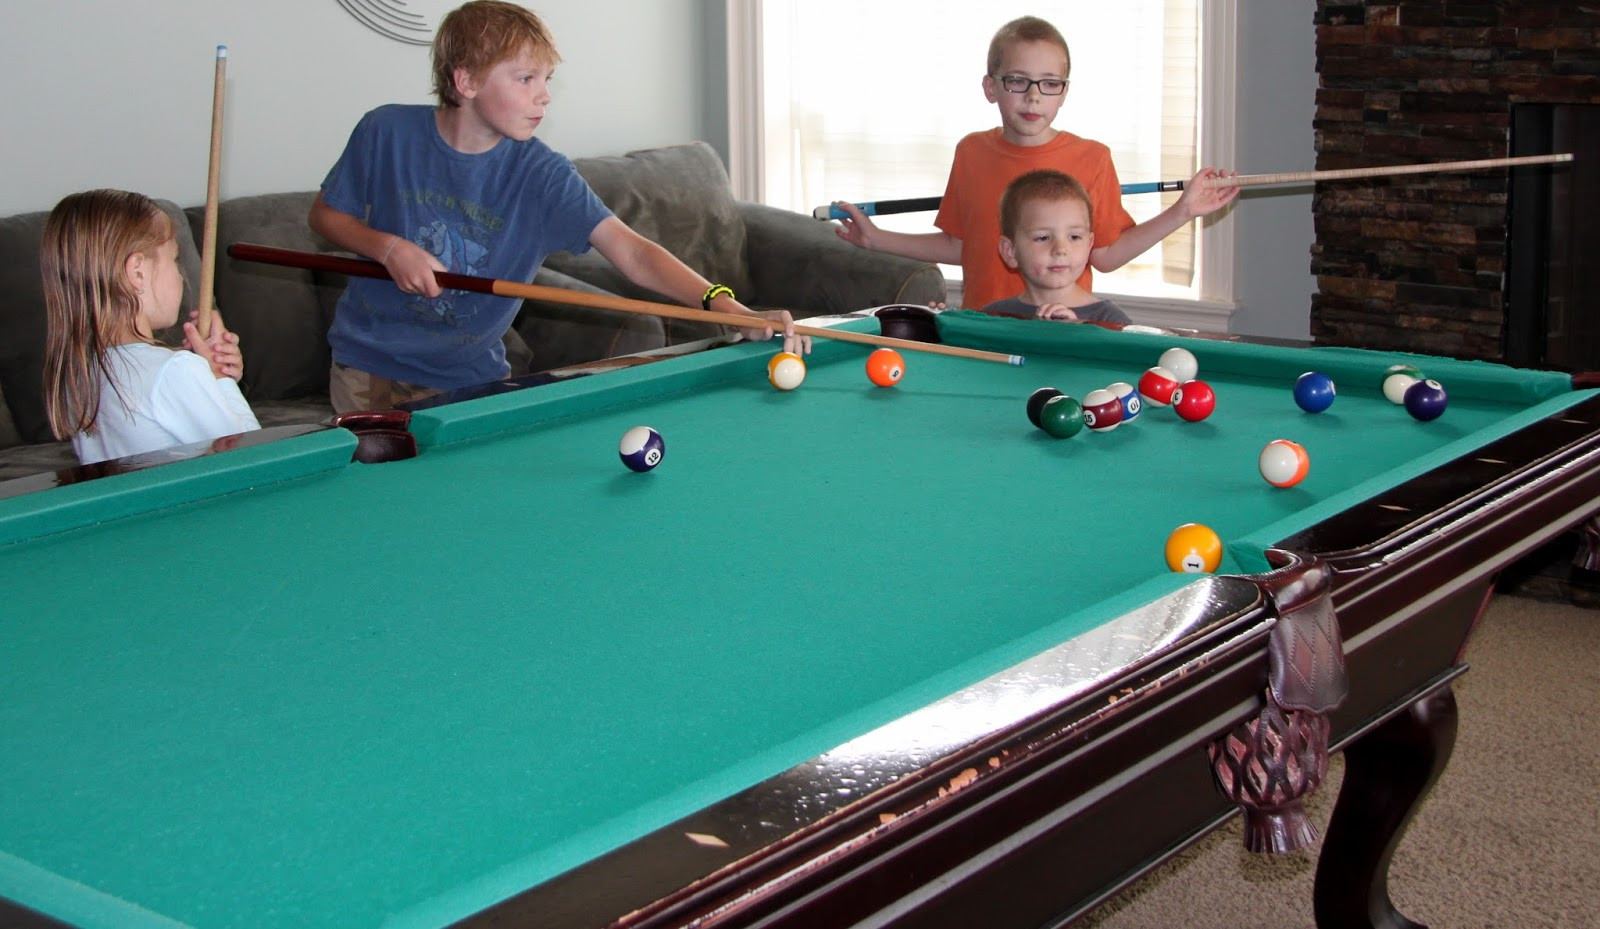 Kids Pool Table
 Was This Really a Sharp Idea Family Reunion 2013